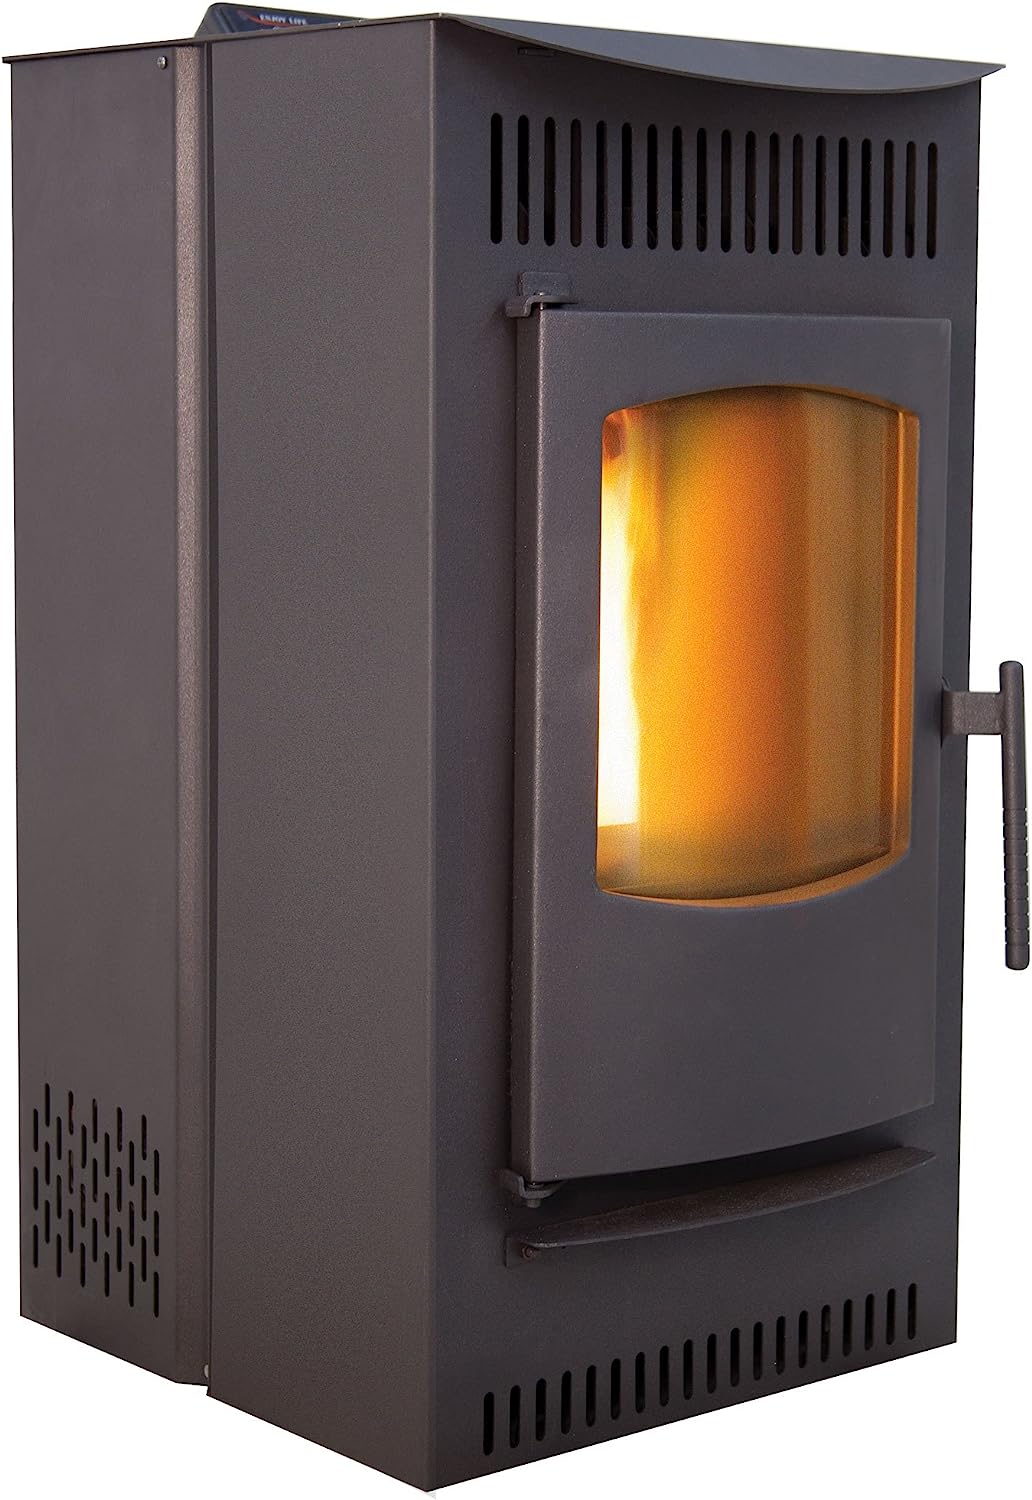 Castle Serenity Stove 12327 Wood Pellet with Smart [...]